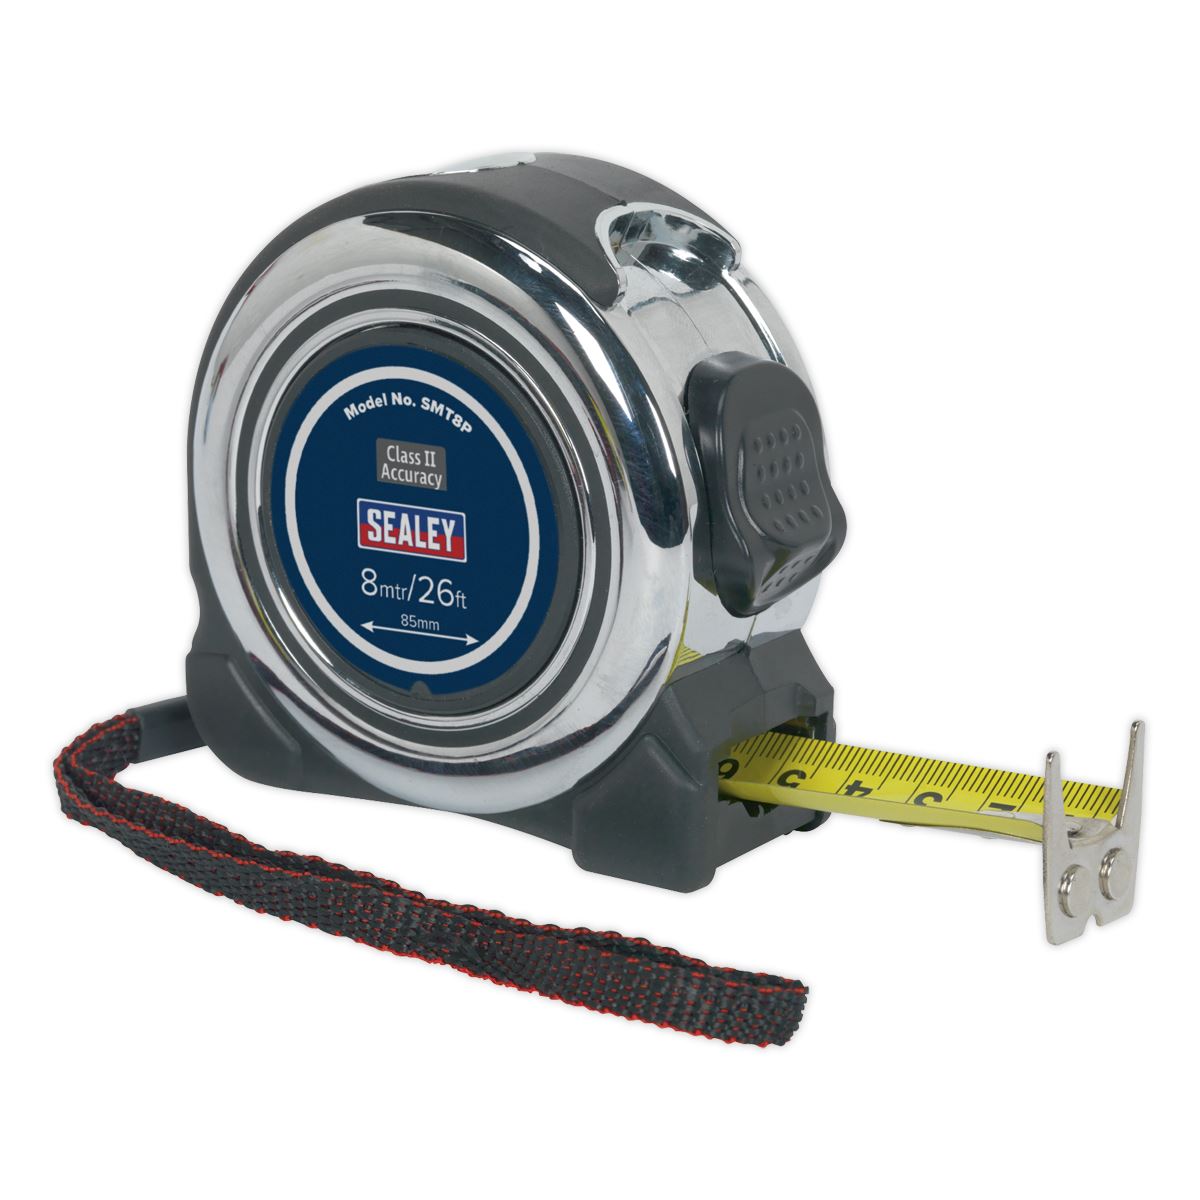 Sealey Professional Tape Measure Chrome Body 5m or 8m